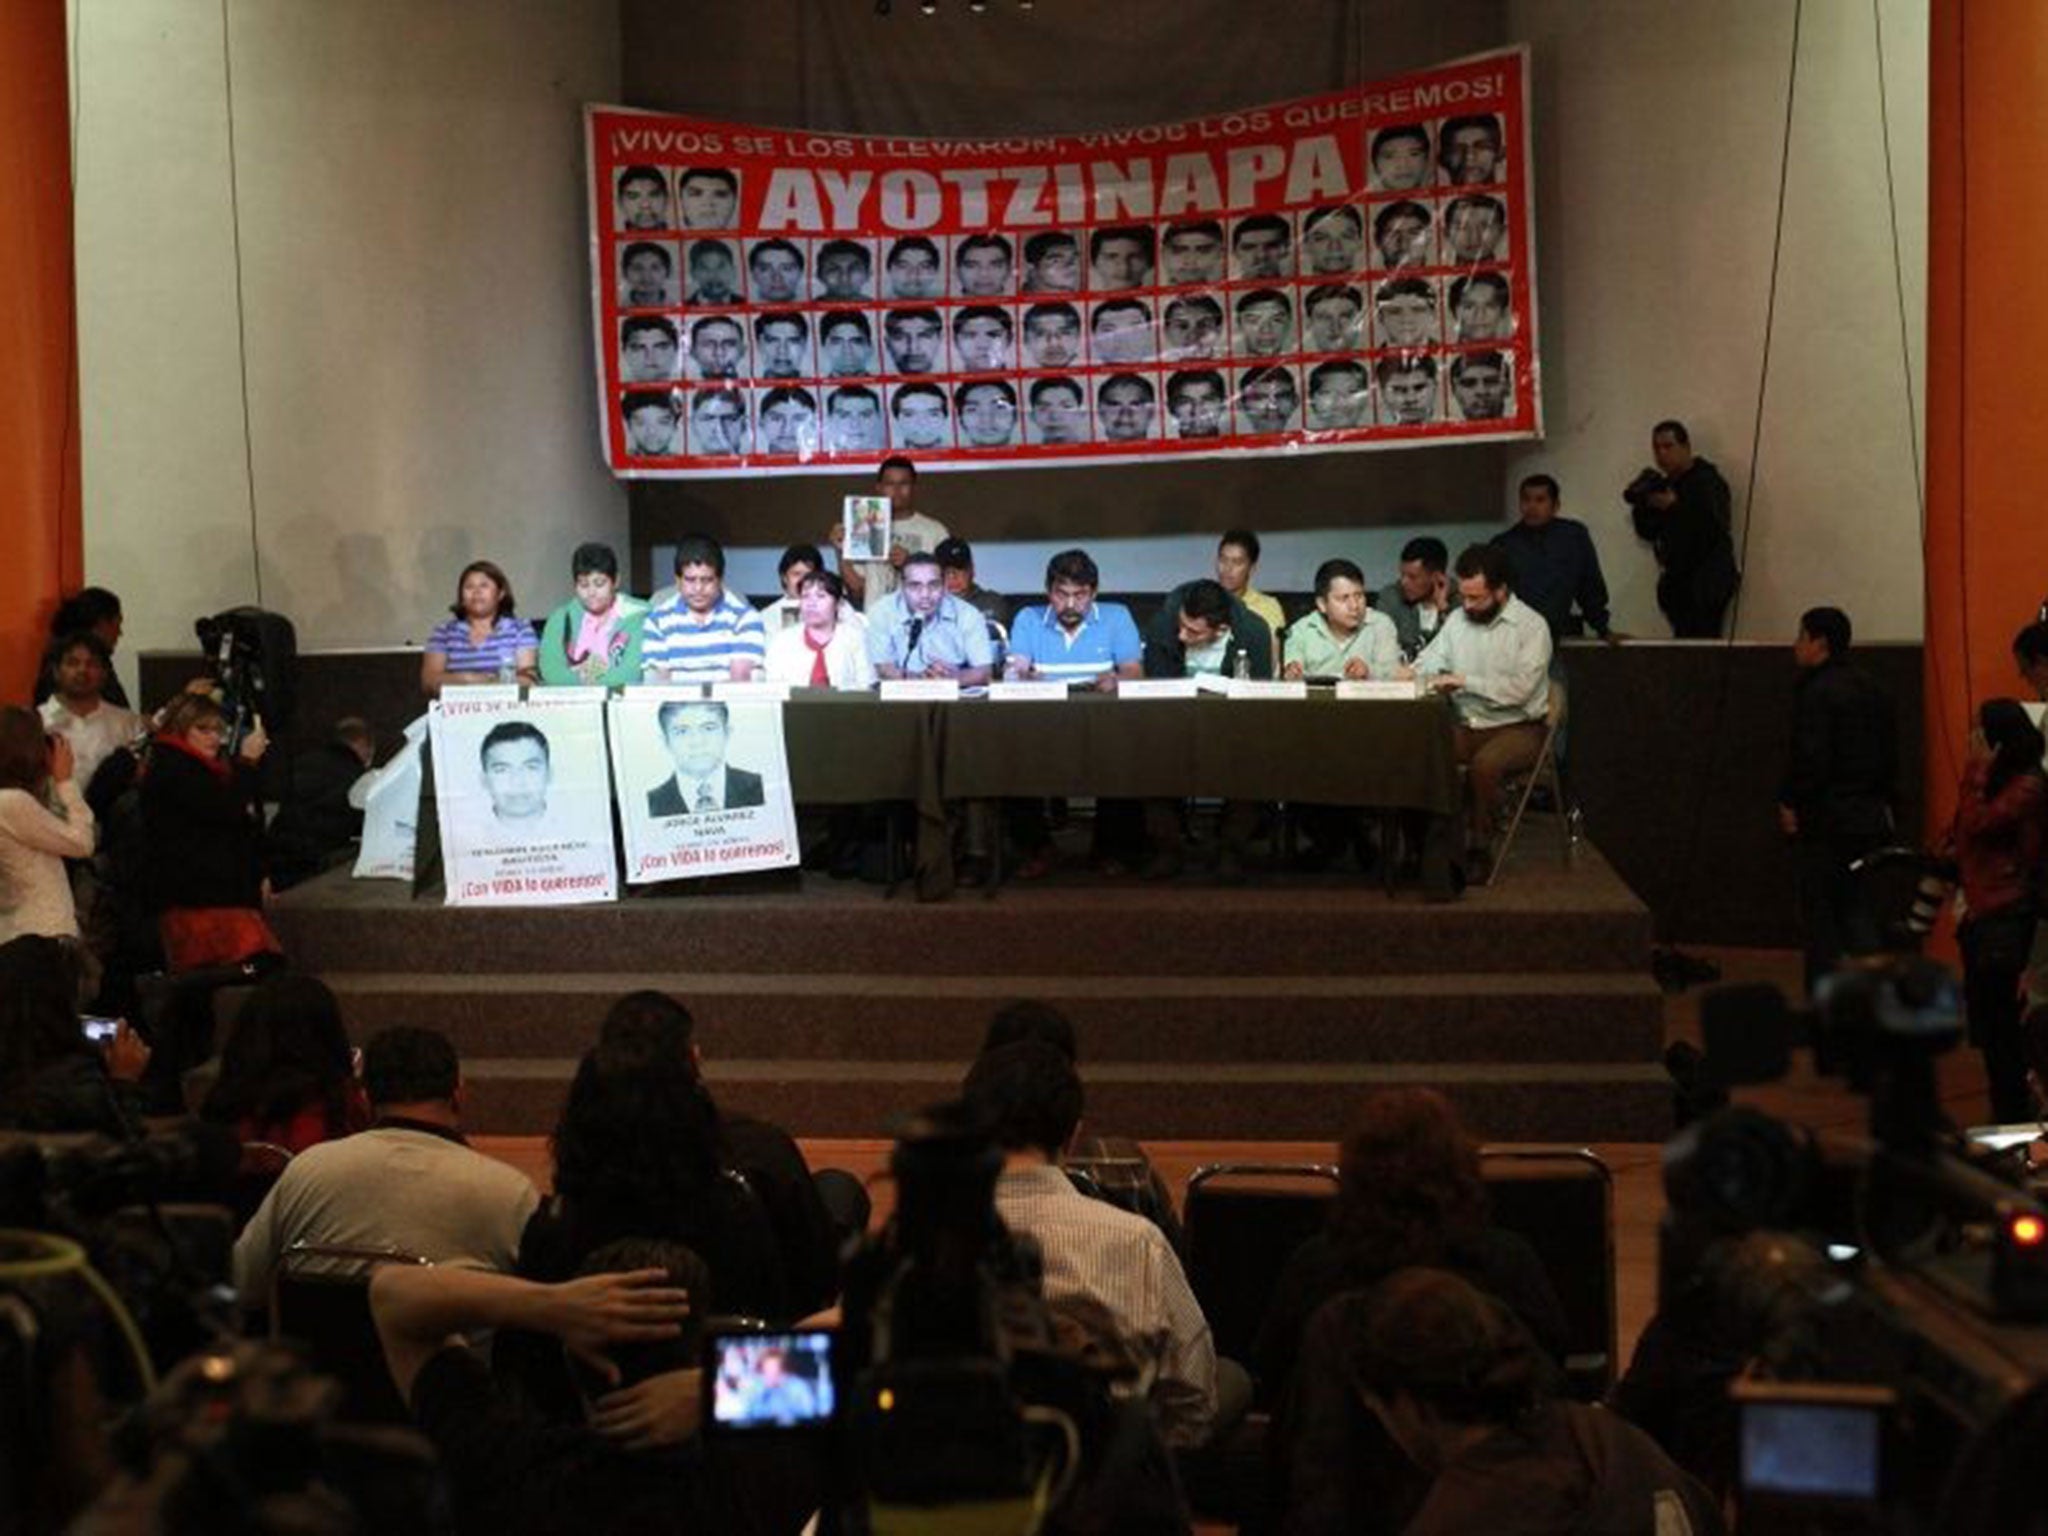 Parents of the 43 students missing in Iguala, Mexico, participate in a press conference in Mexico City, Mexico, 27 January